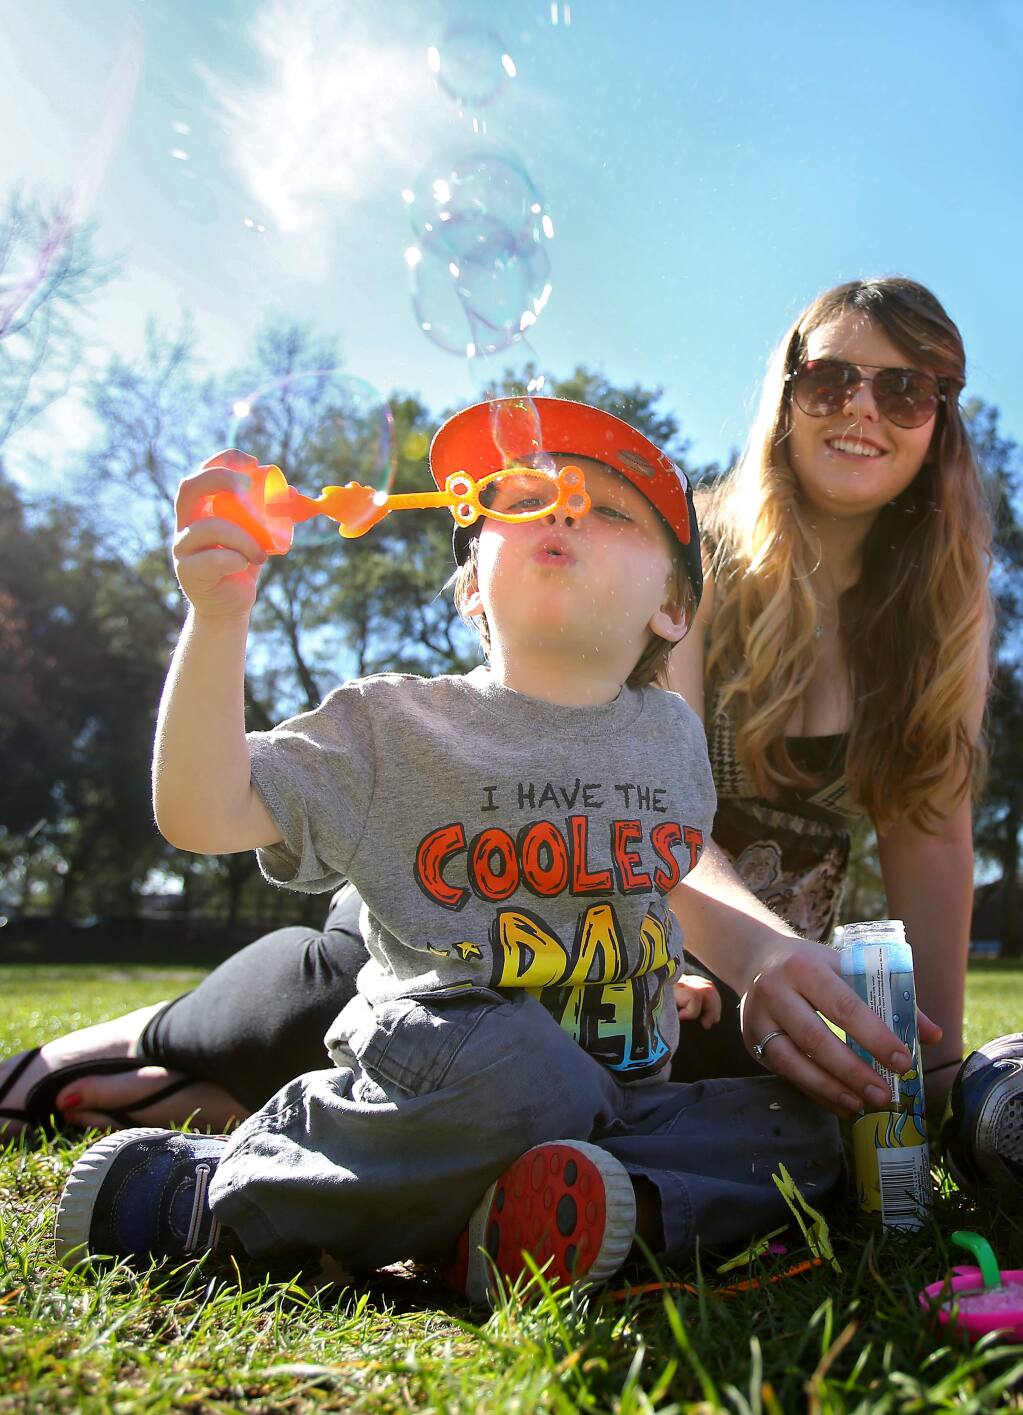 Jack Gless, 2, blows bubbles with his mom, Kelly Pennington, at Howarth Park in Santa Rosa on Wednesday, January 28, 2015. (Christopher Chung/ The Press Democrat)